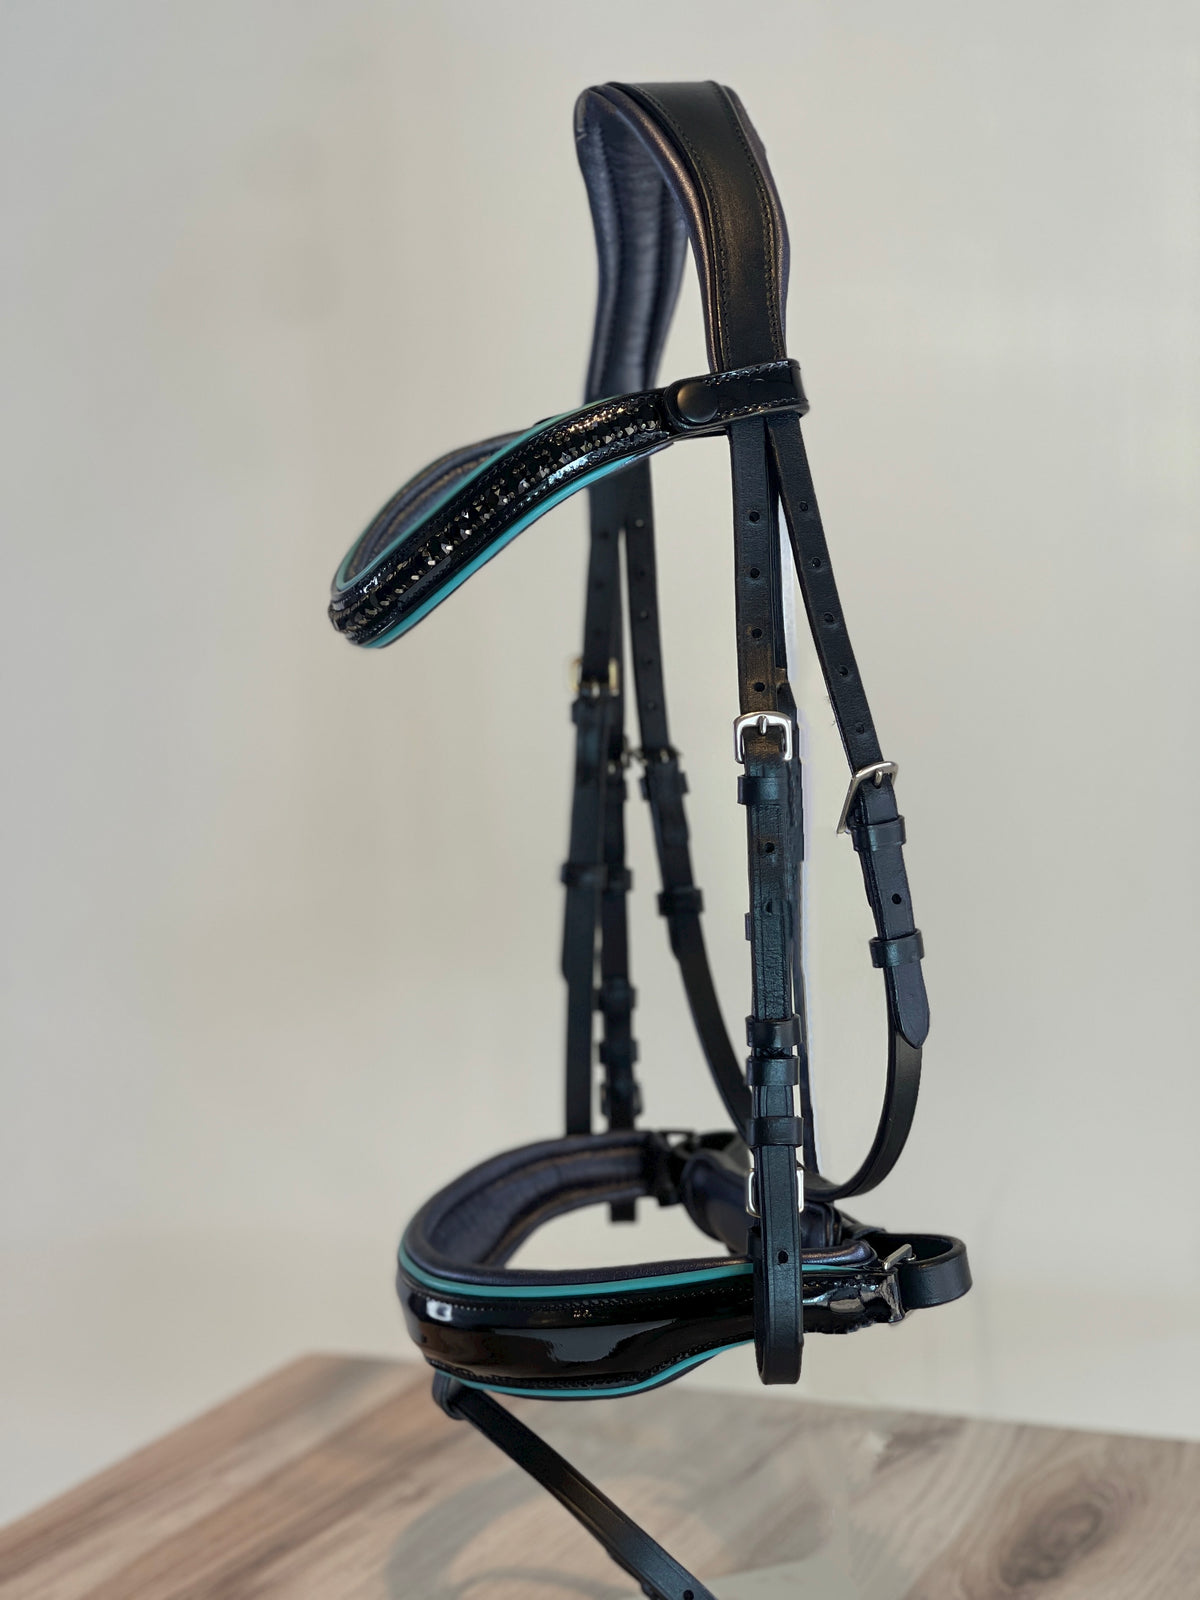 The Obsidian Snaffle Bridle